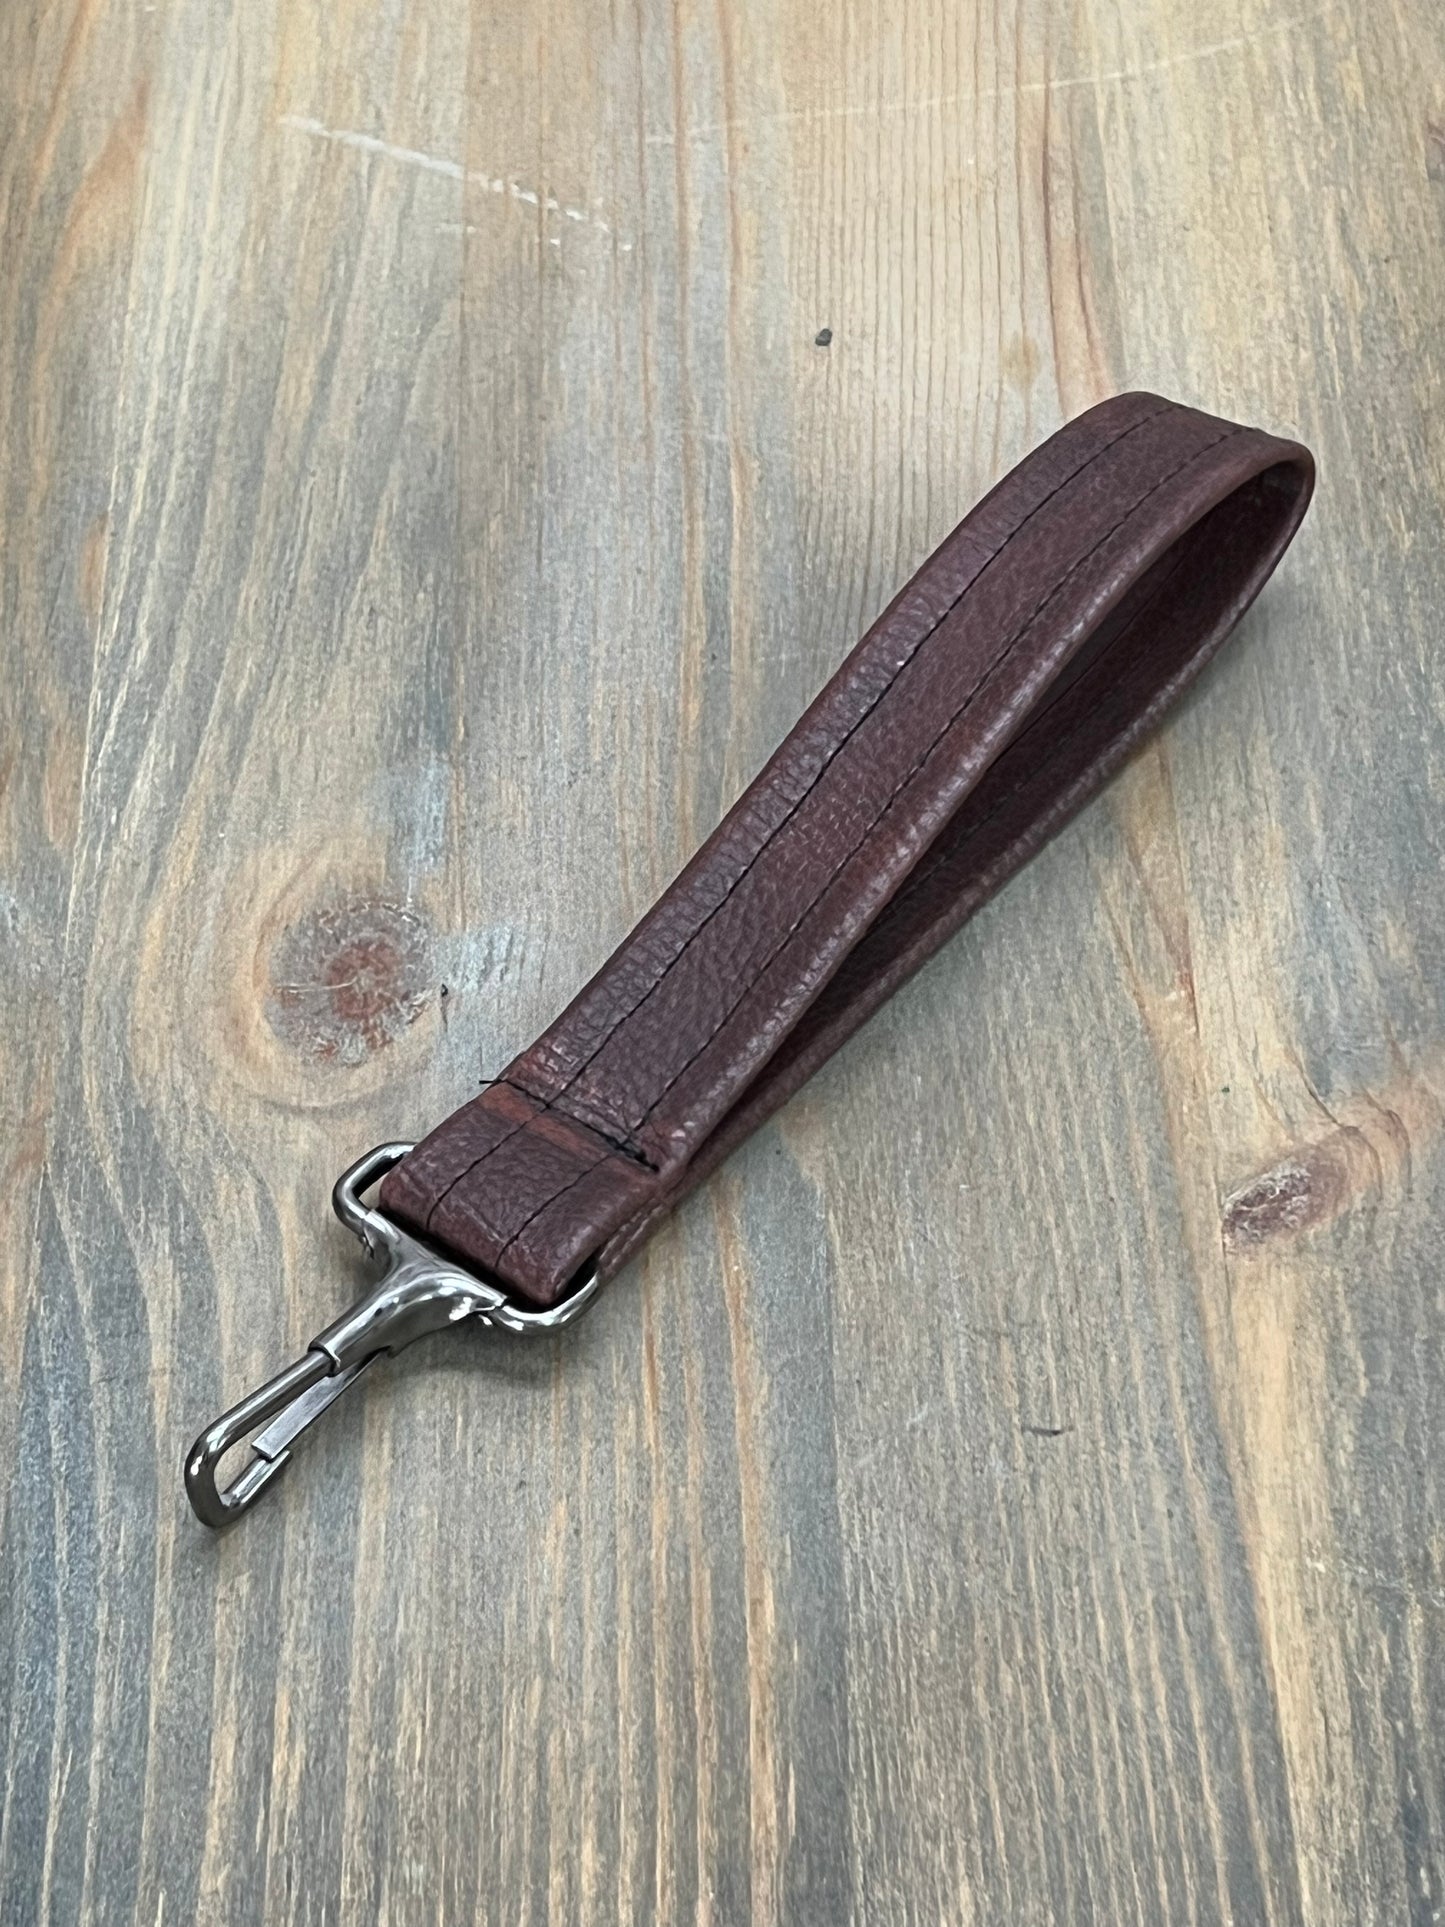 Brown Leather Keychain